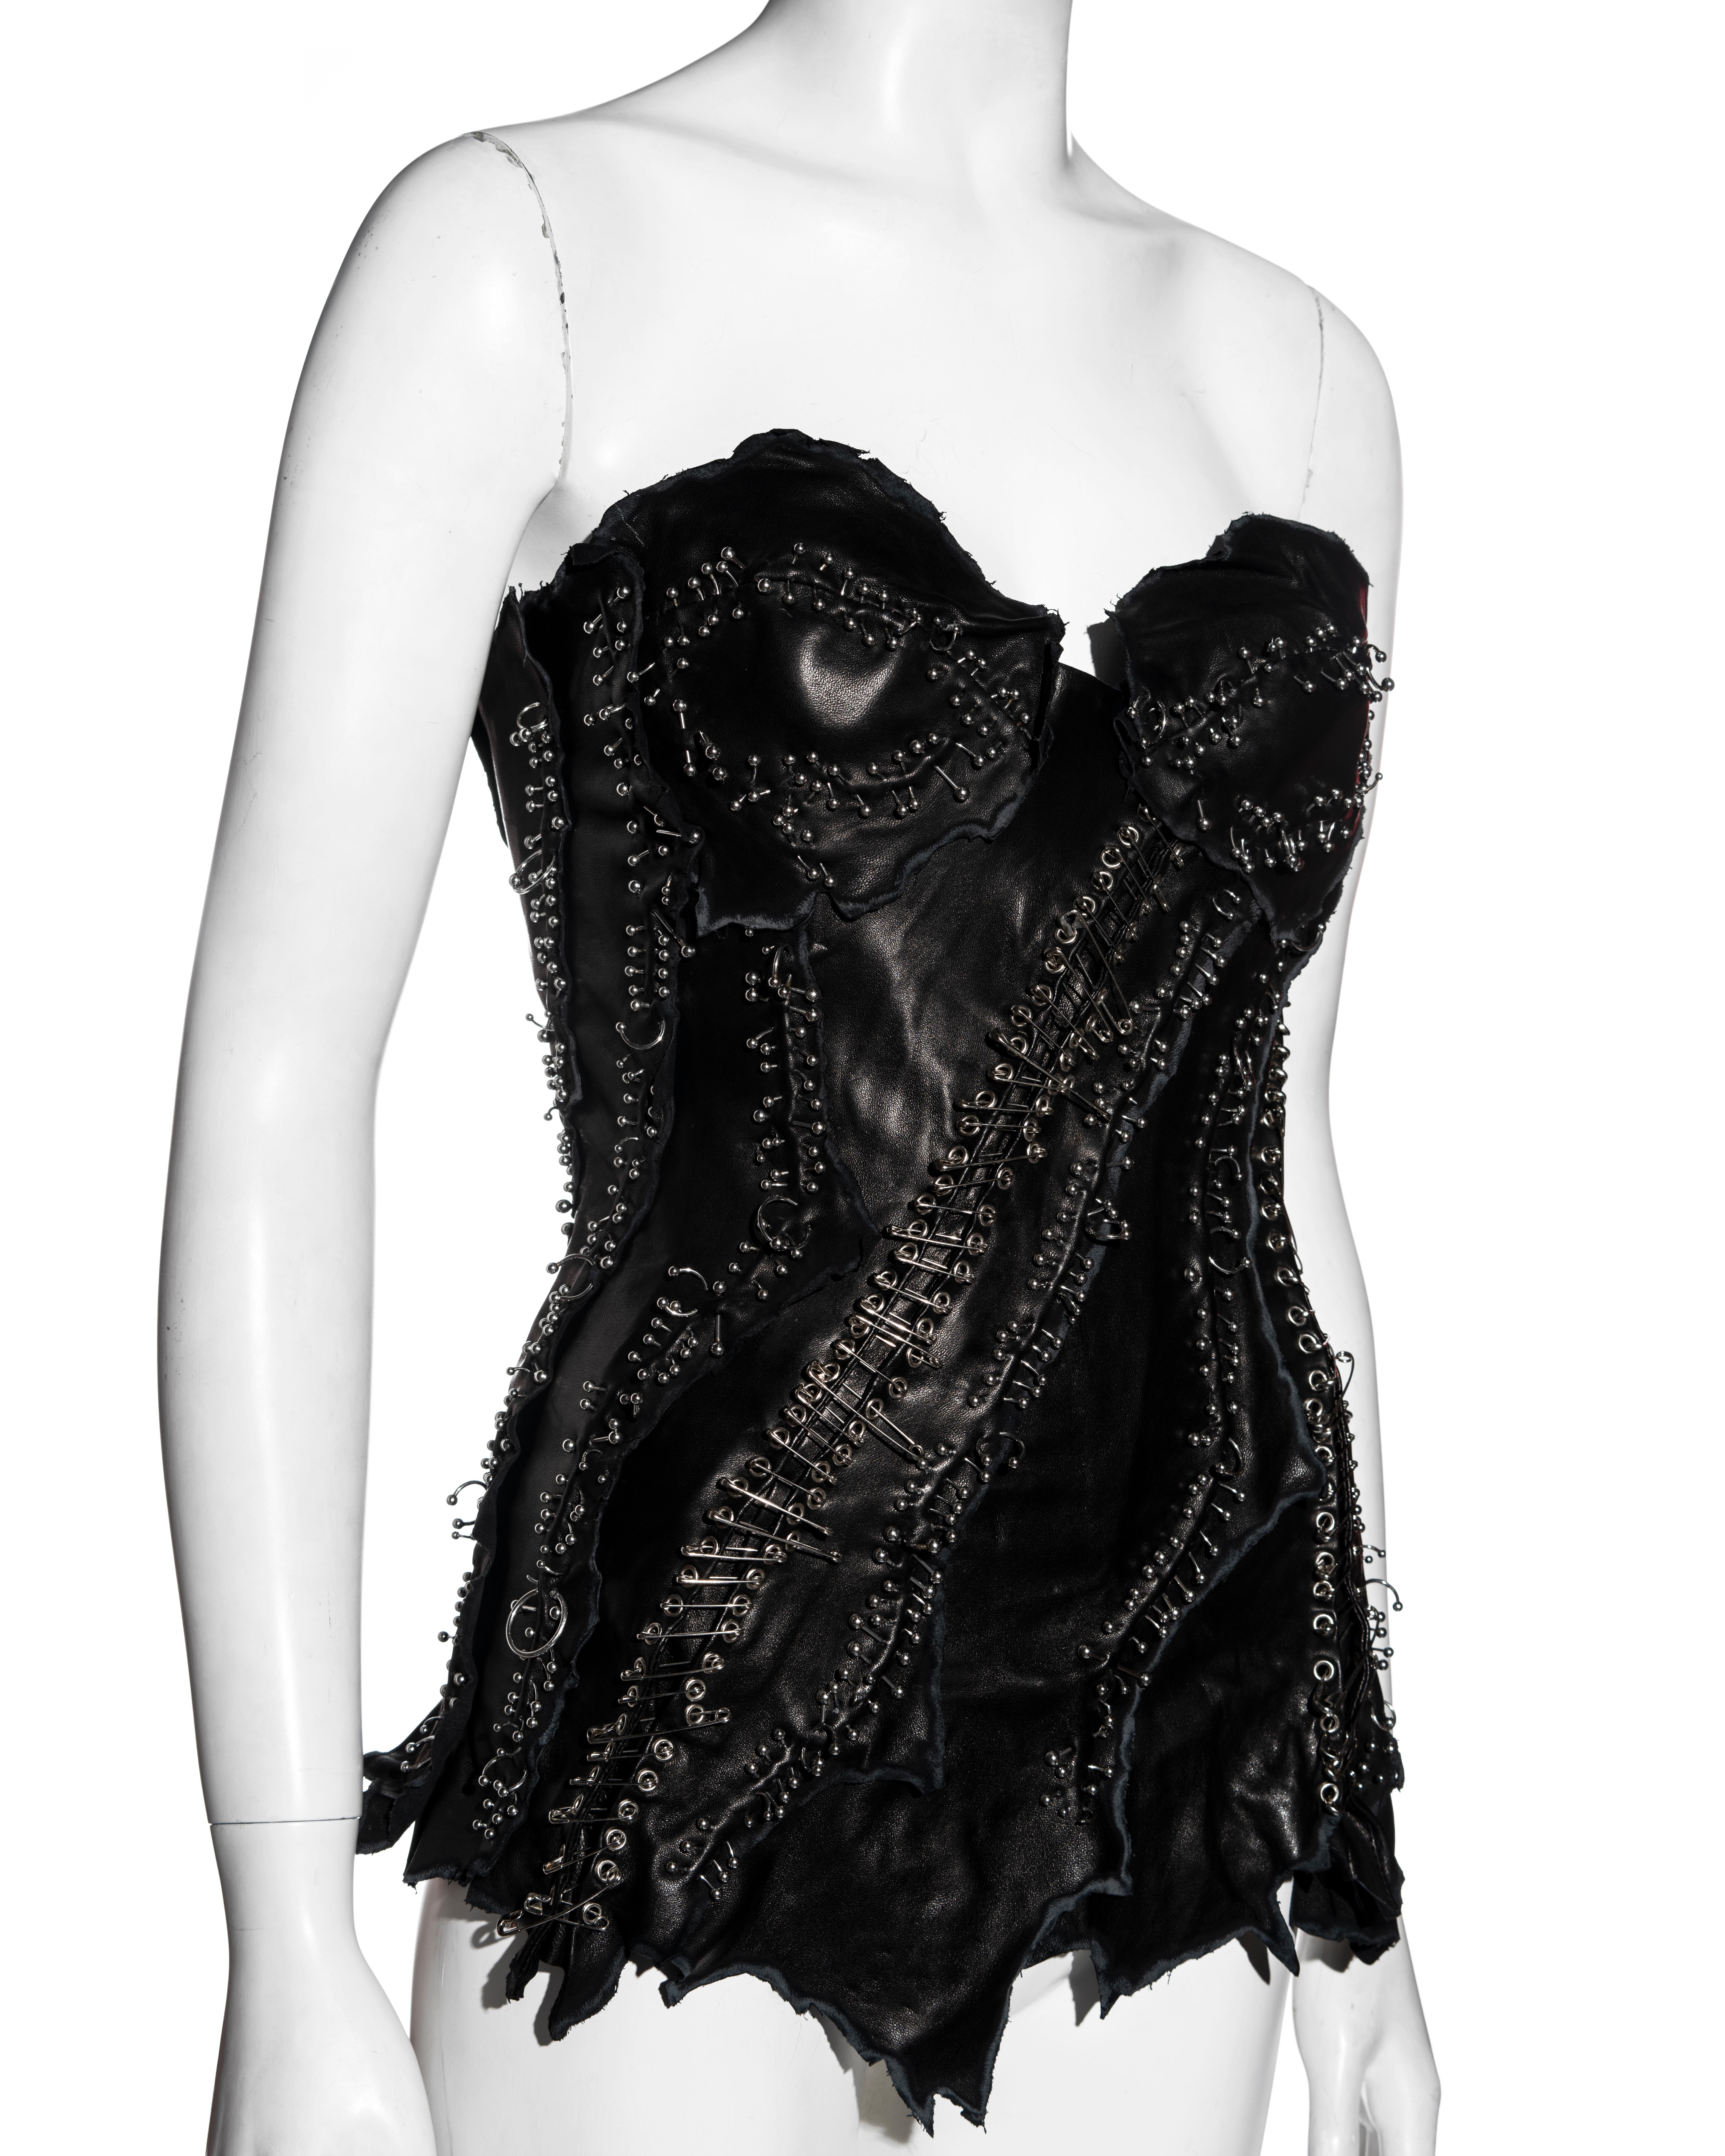 Black Balmain by Christophe Decarnin black leather safety-pin corset, ss 2011 For Sale